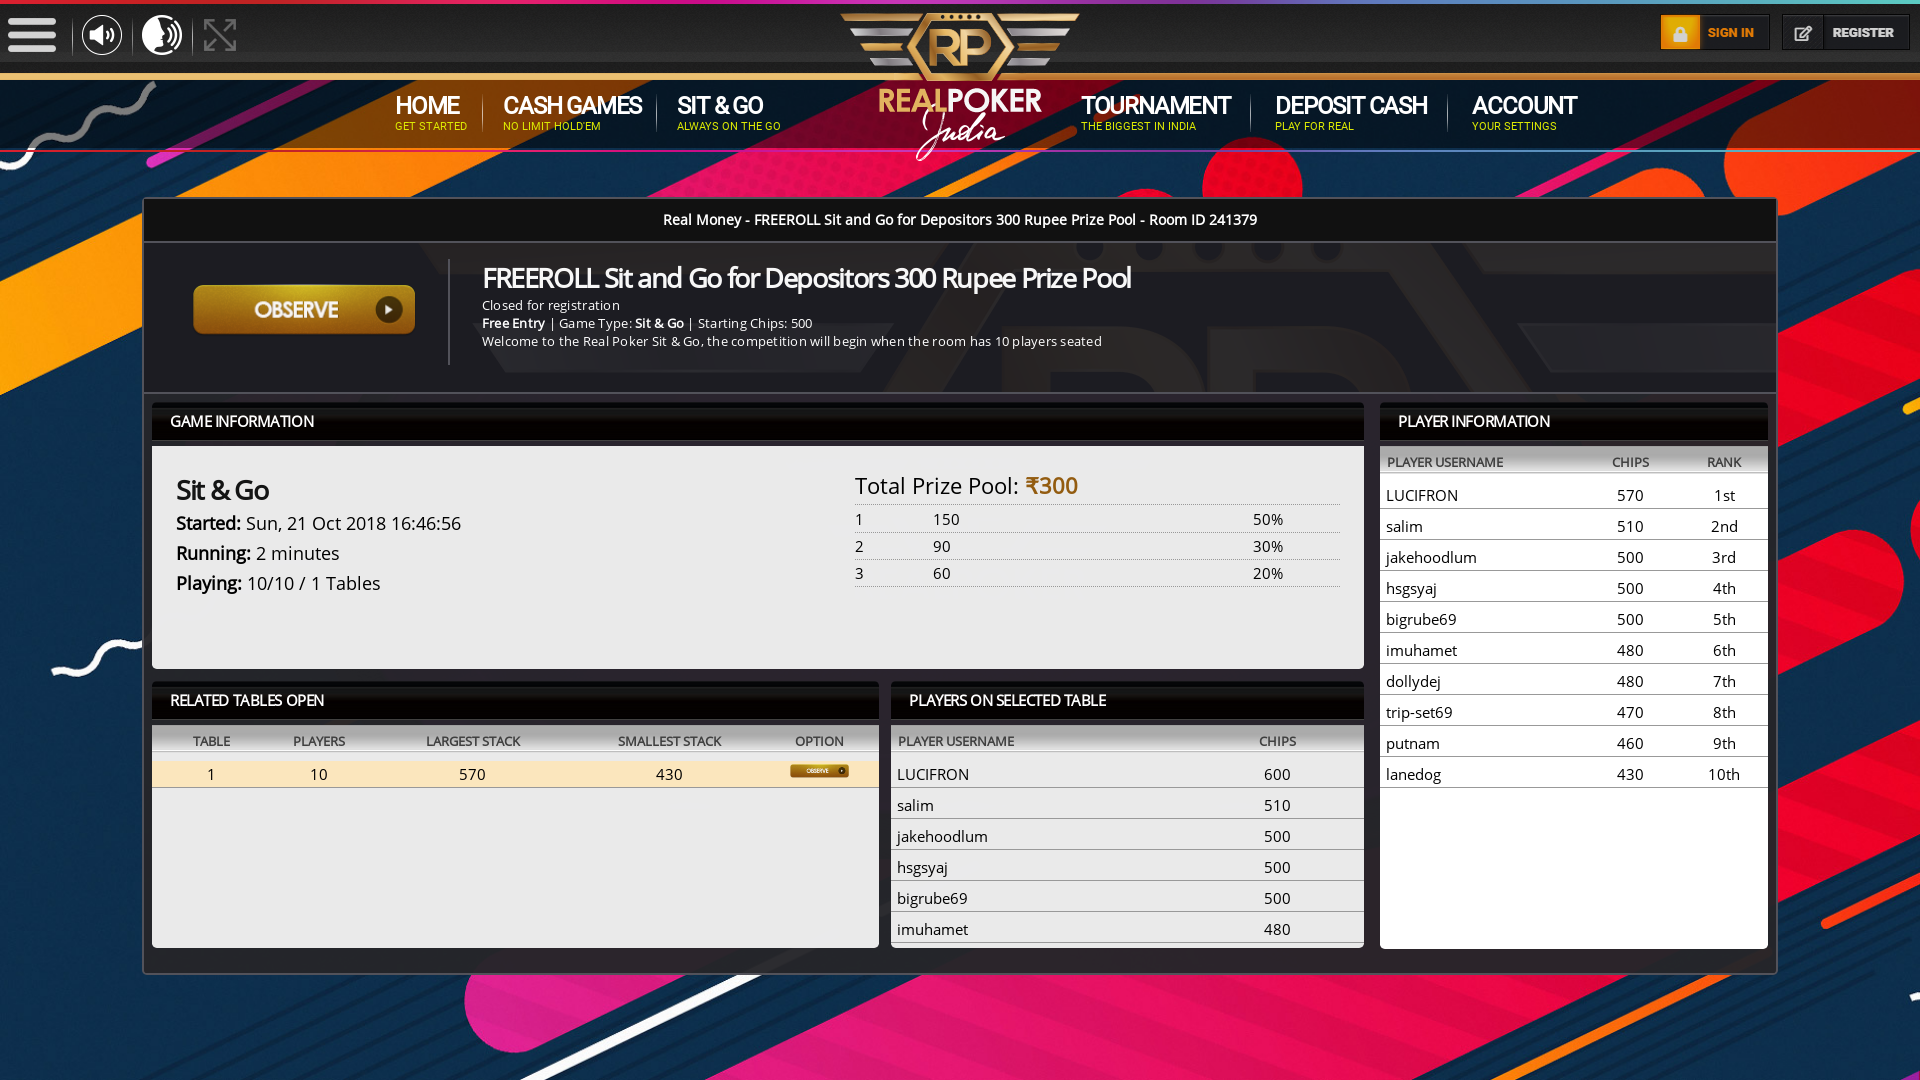 Indian online poker on a 10 player table in the 1st minute match up